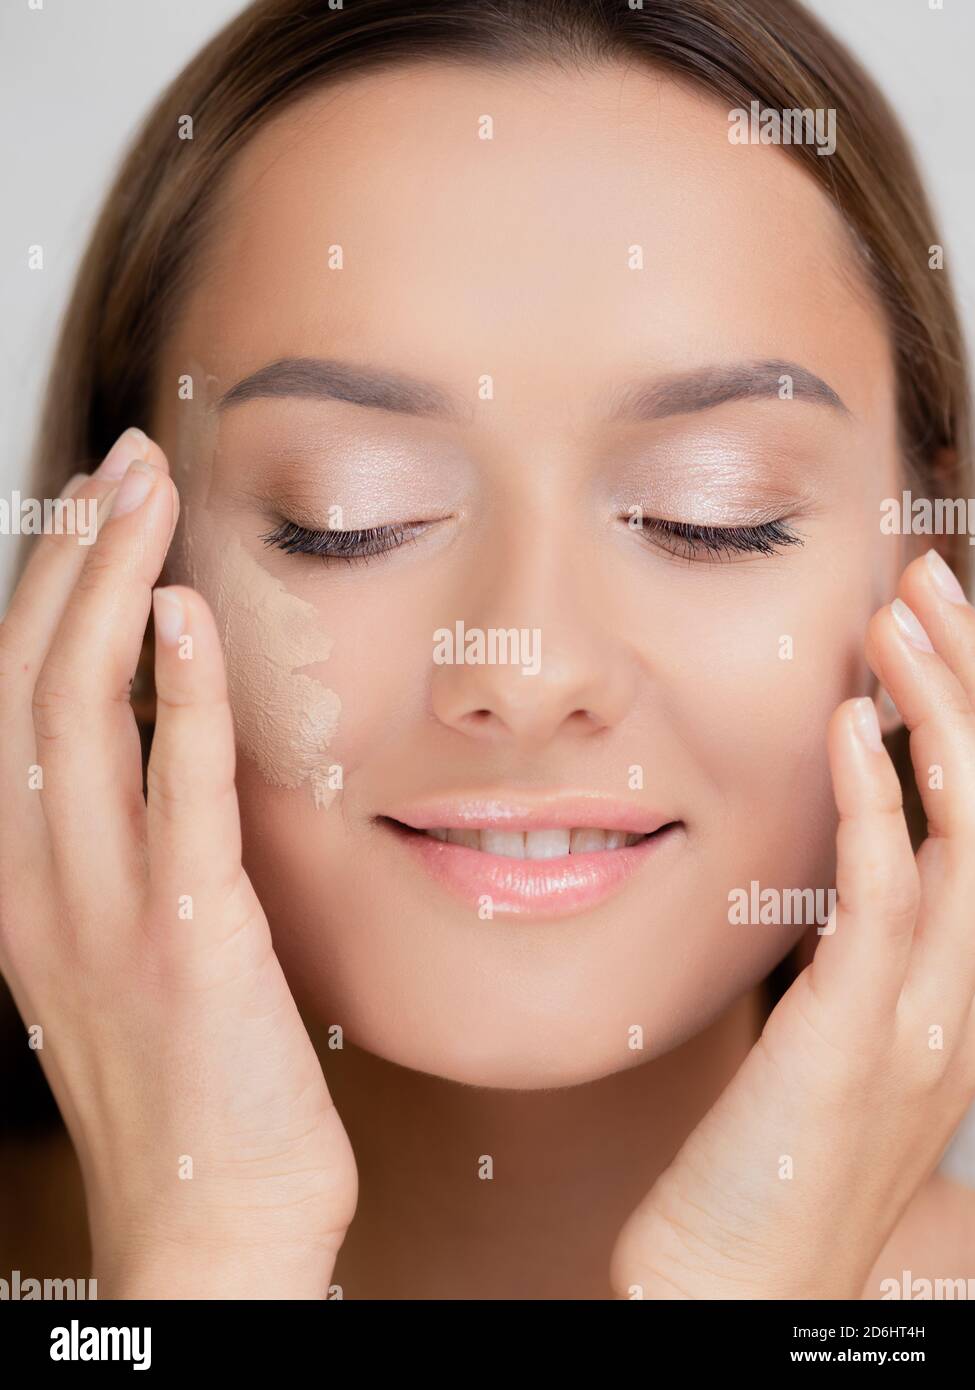 Foundation on the cheek, portrait of a young beautiful woman with beautiful clear skin. Well-groomed skin and makeup. Stock Photo